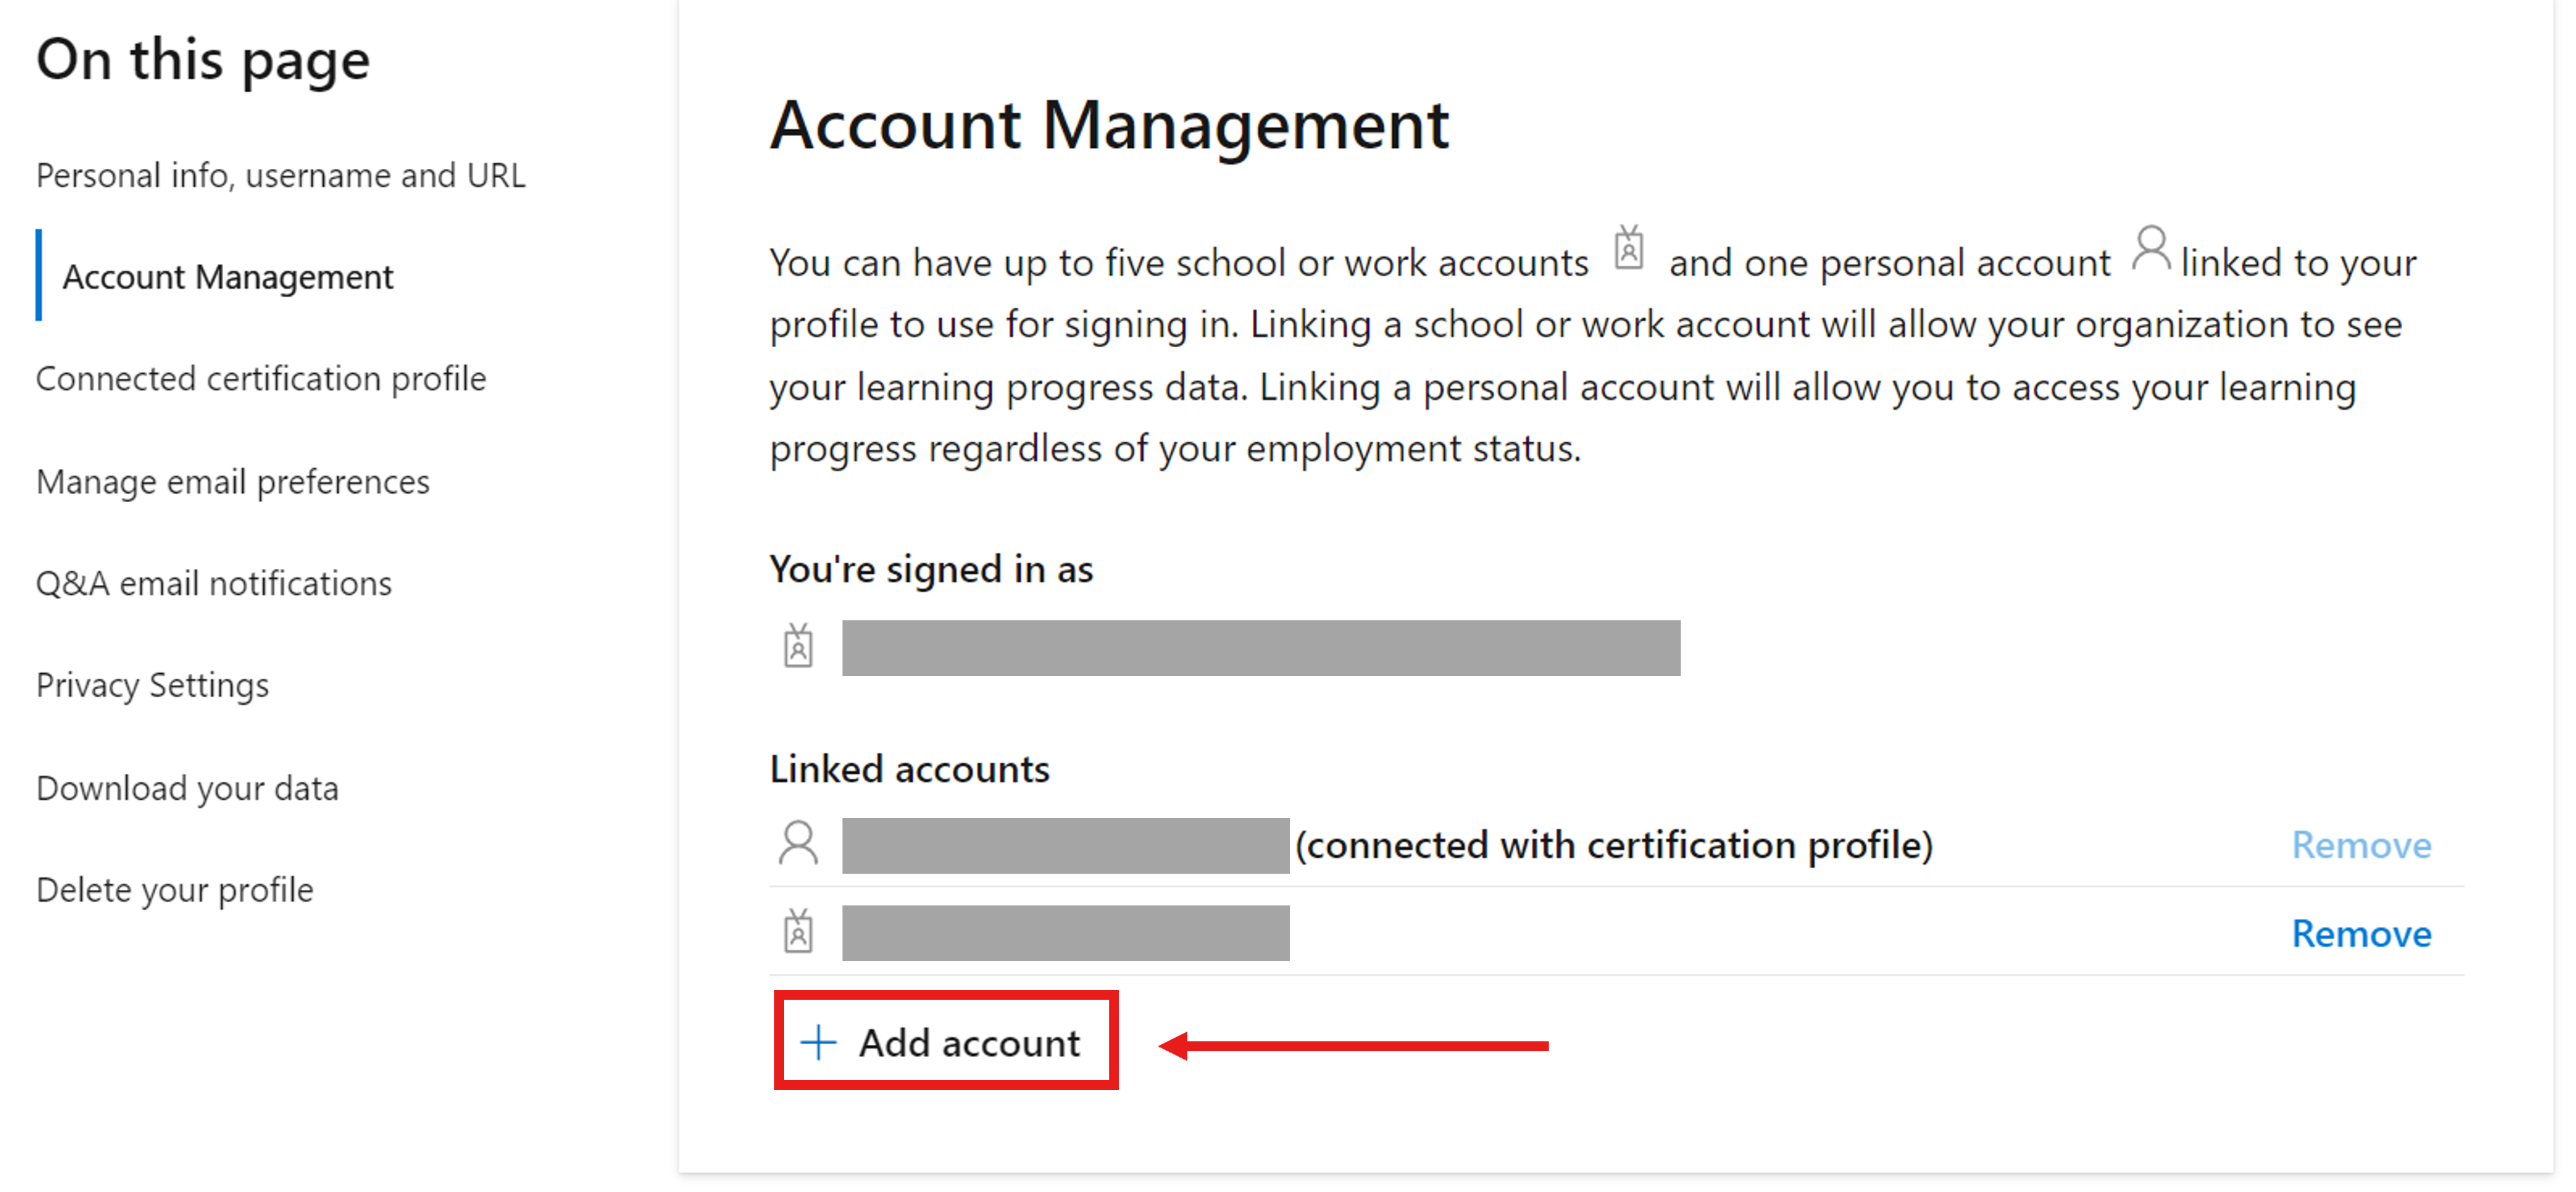 Screenshot of the Account Management section in the Microsoft Learn profile settings.